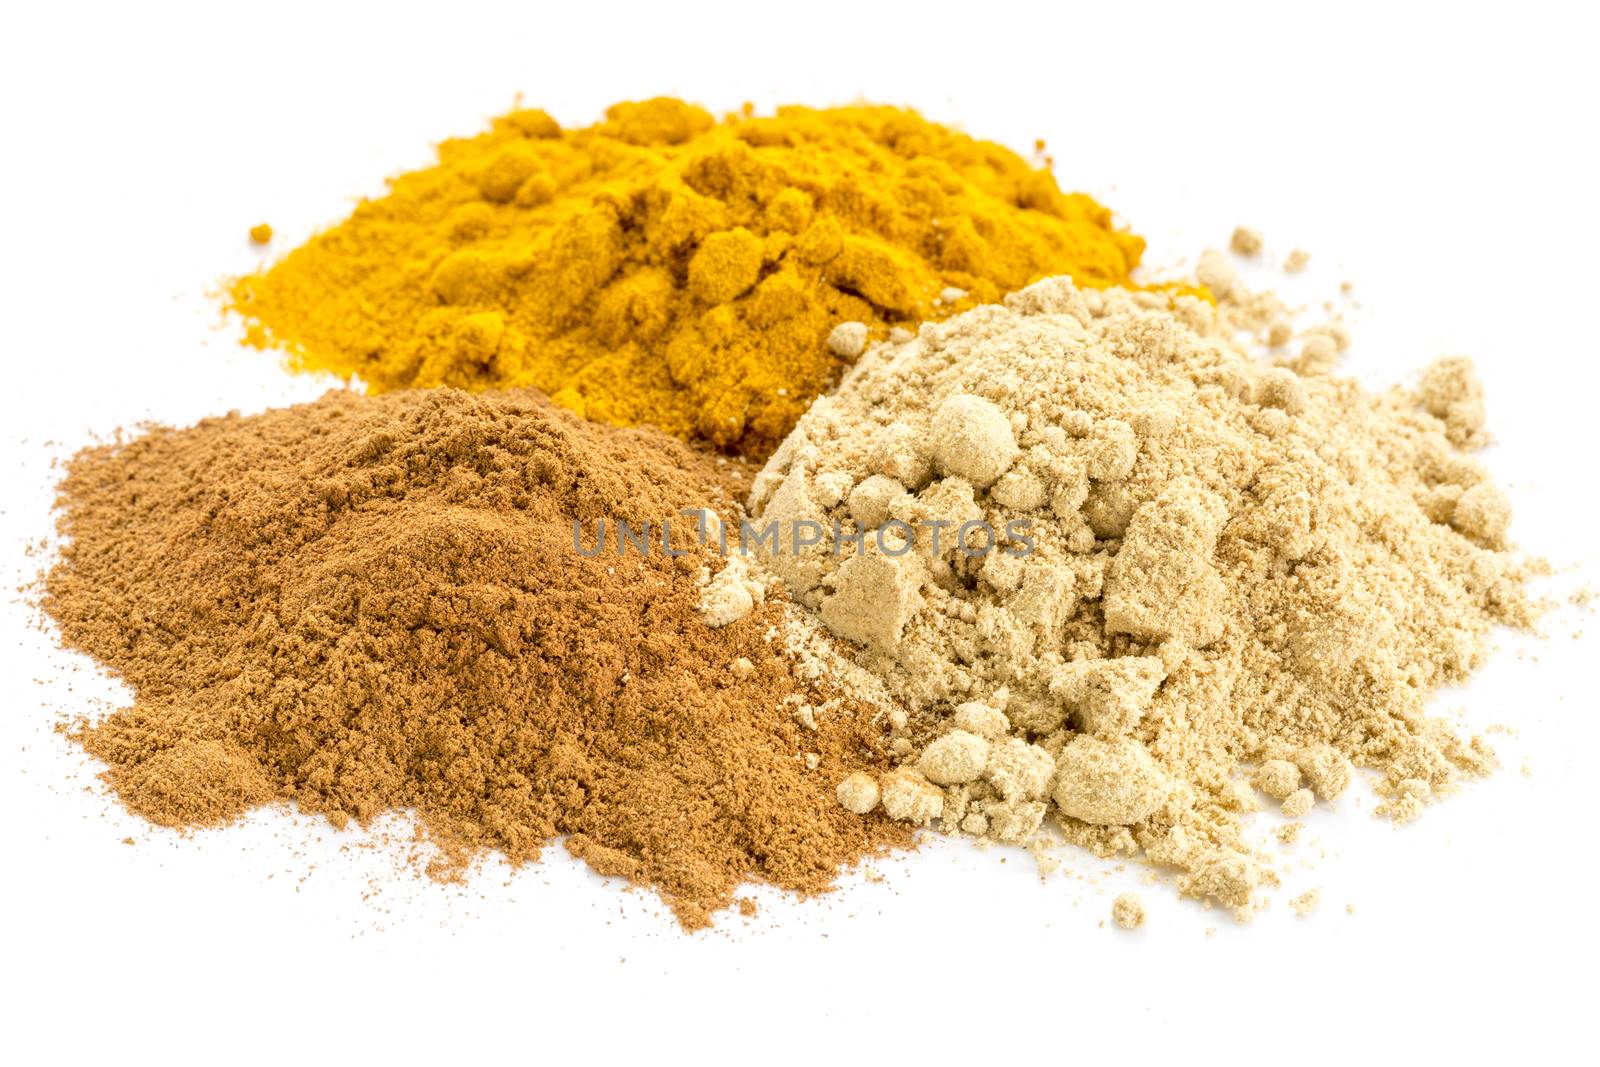 piles of three healthy spices -turmeric, ginger and cinnamon